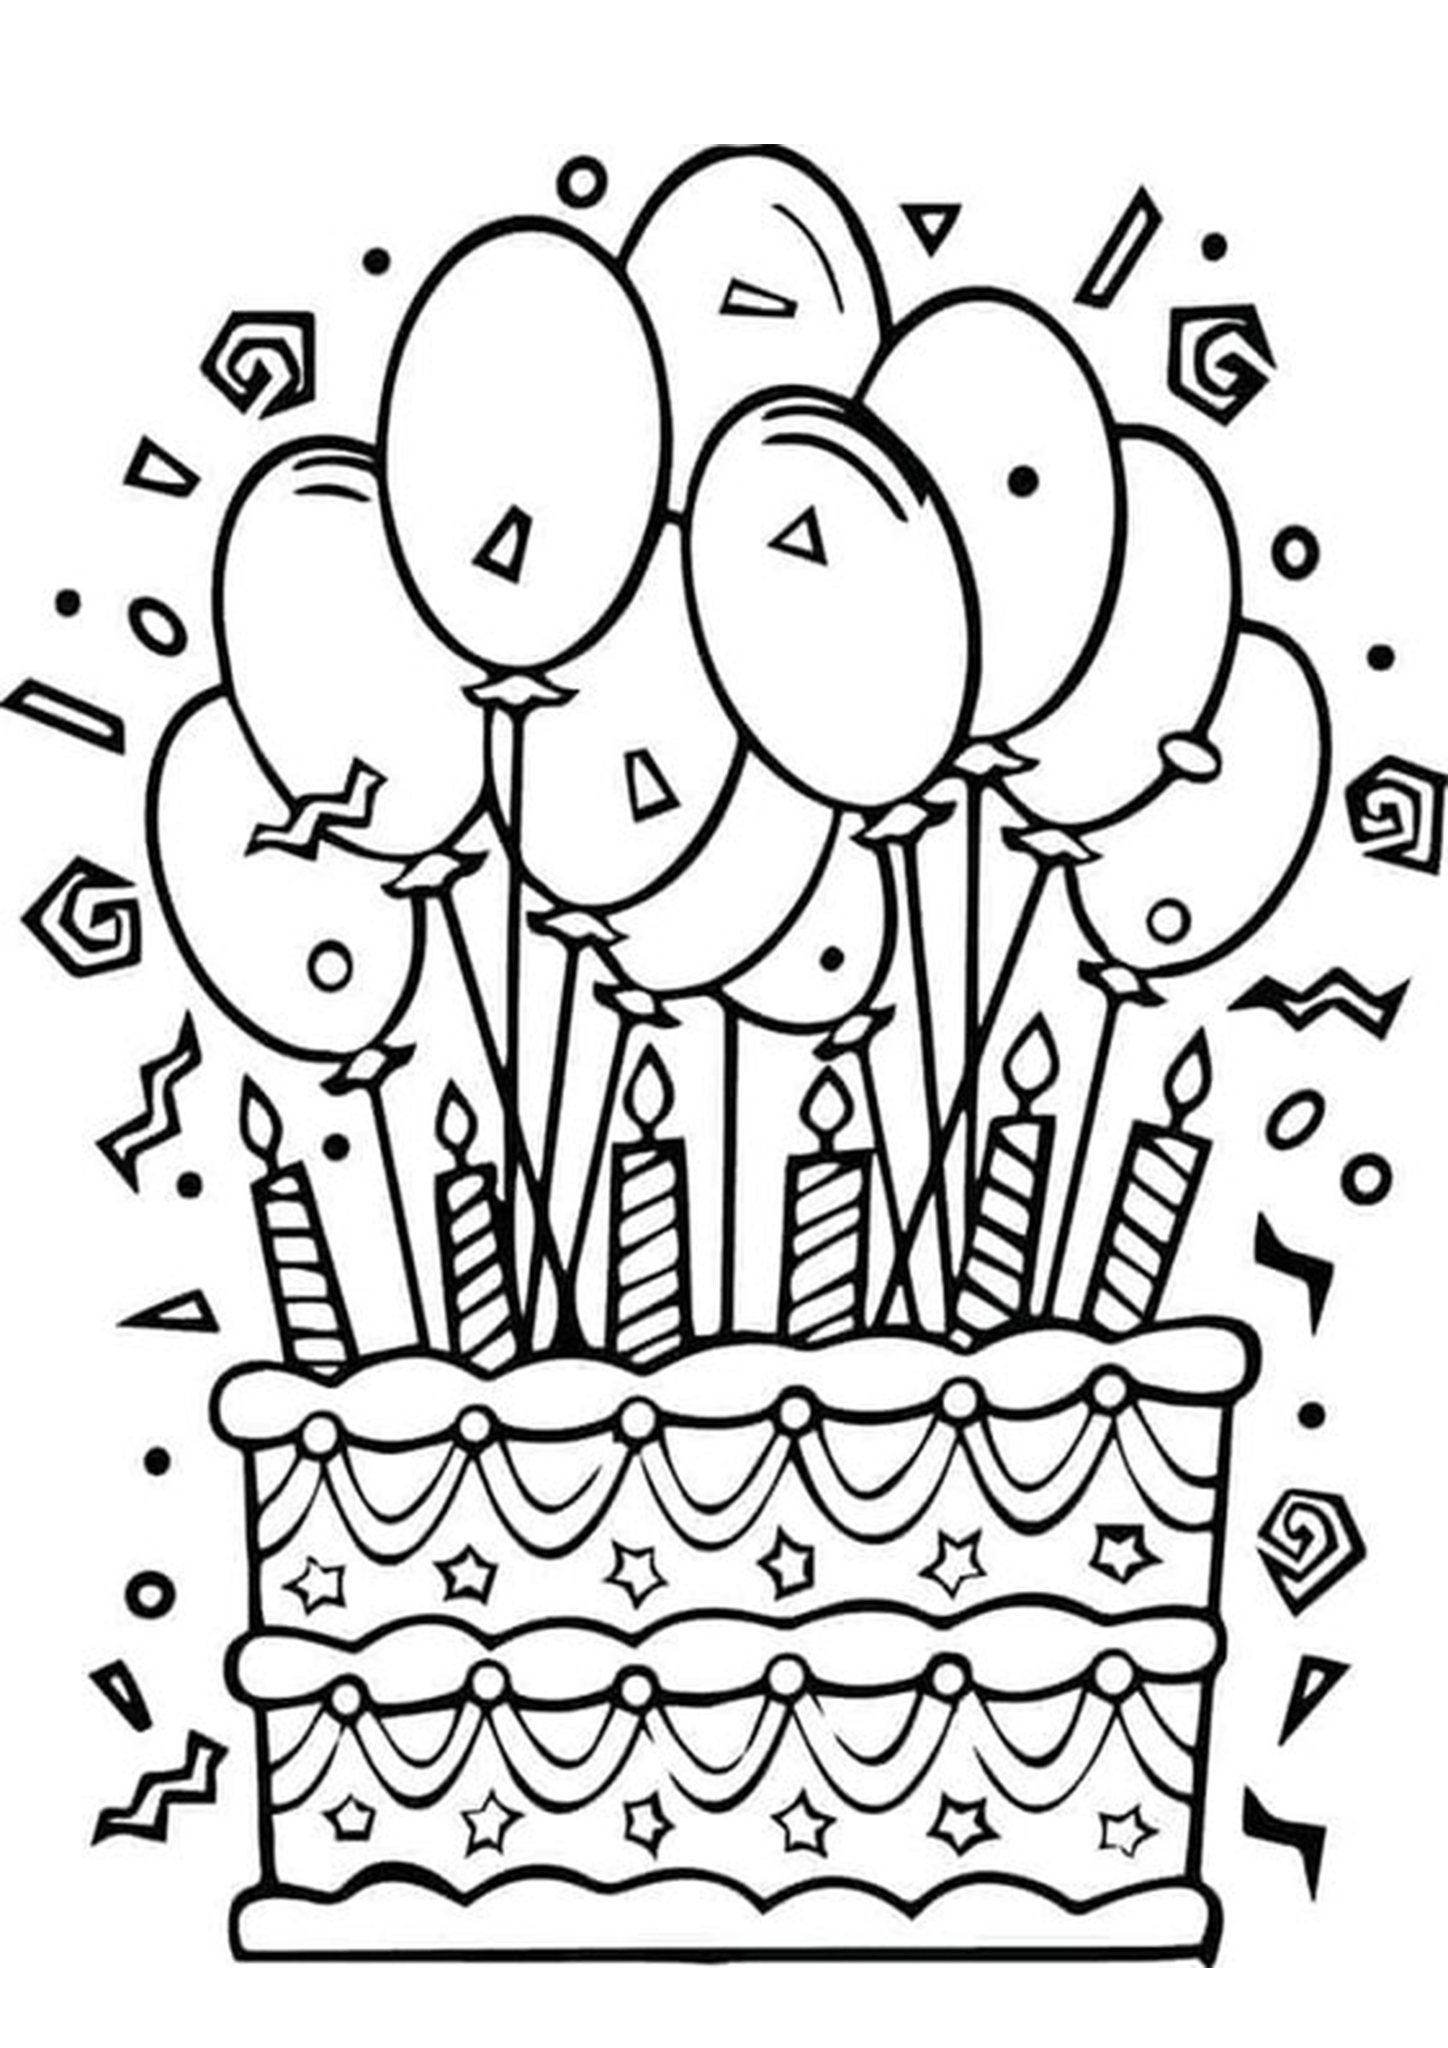 Coloring pages coloring pages free easy to print happy birthday tulamama sheet dr seuss superhero for